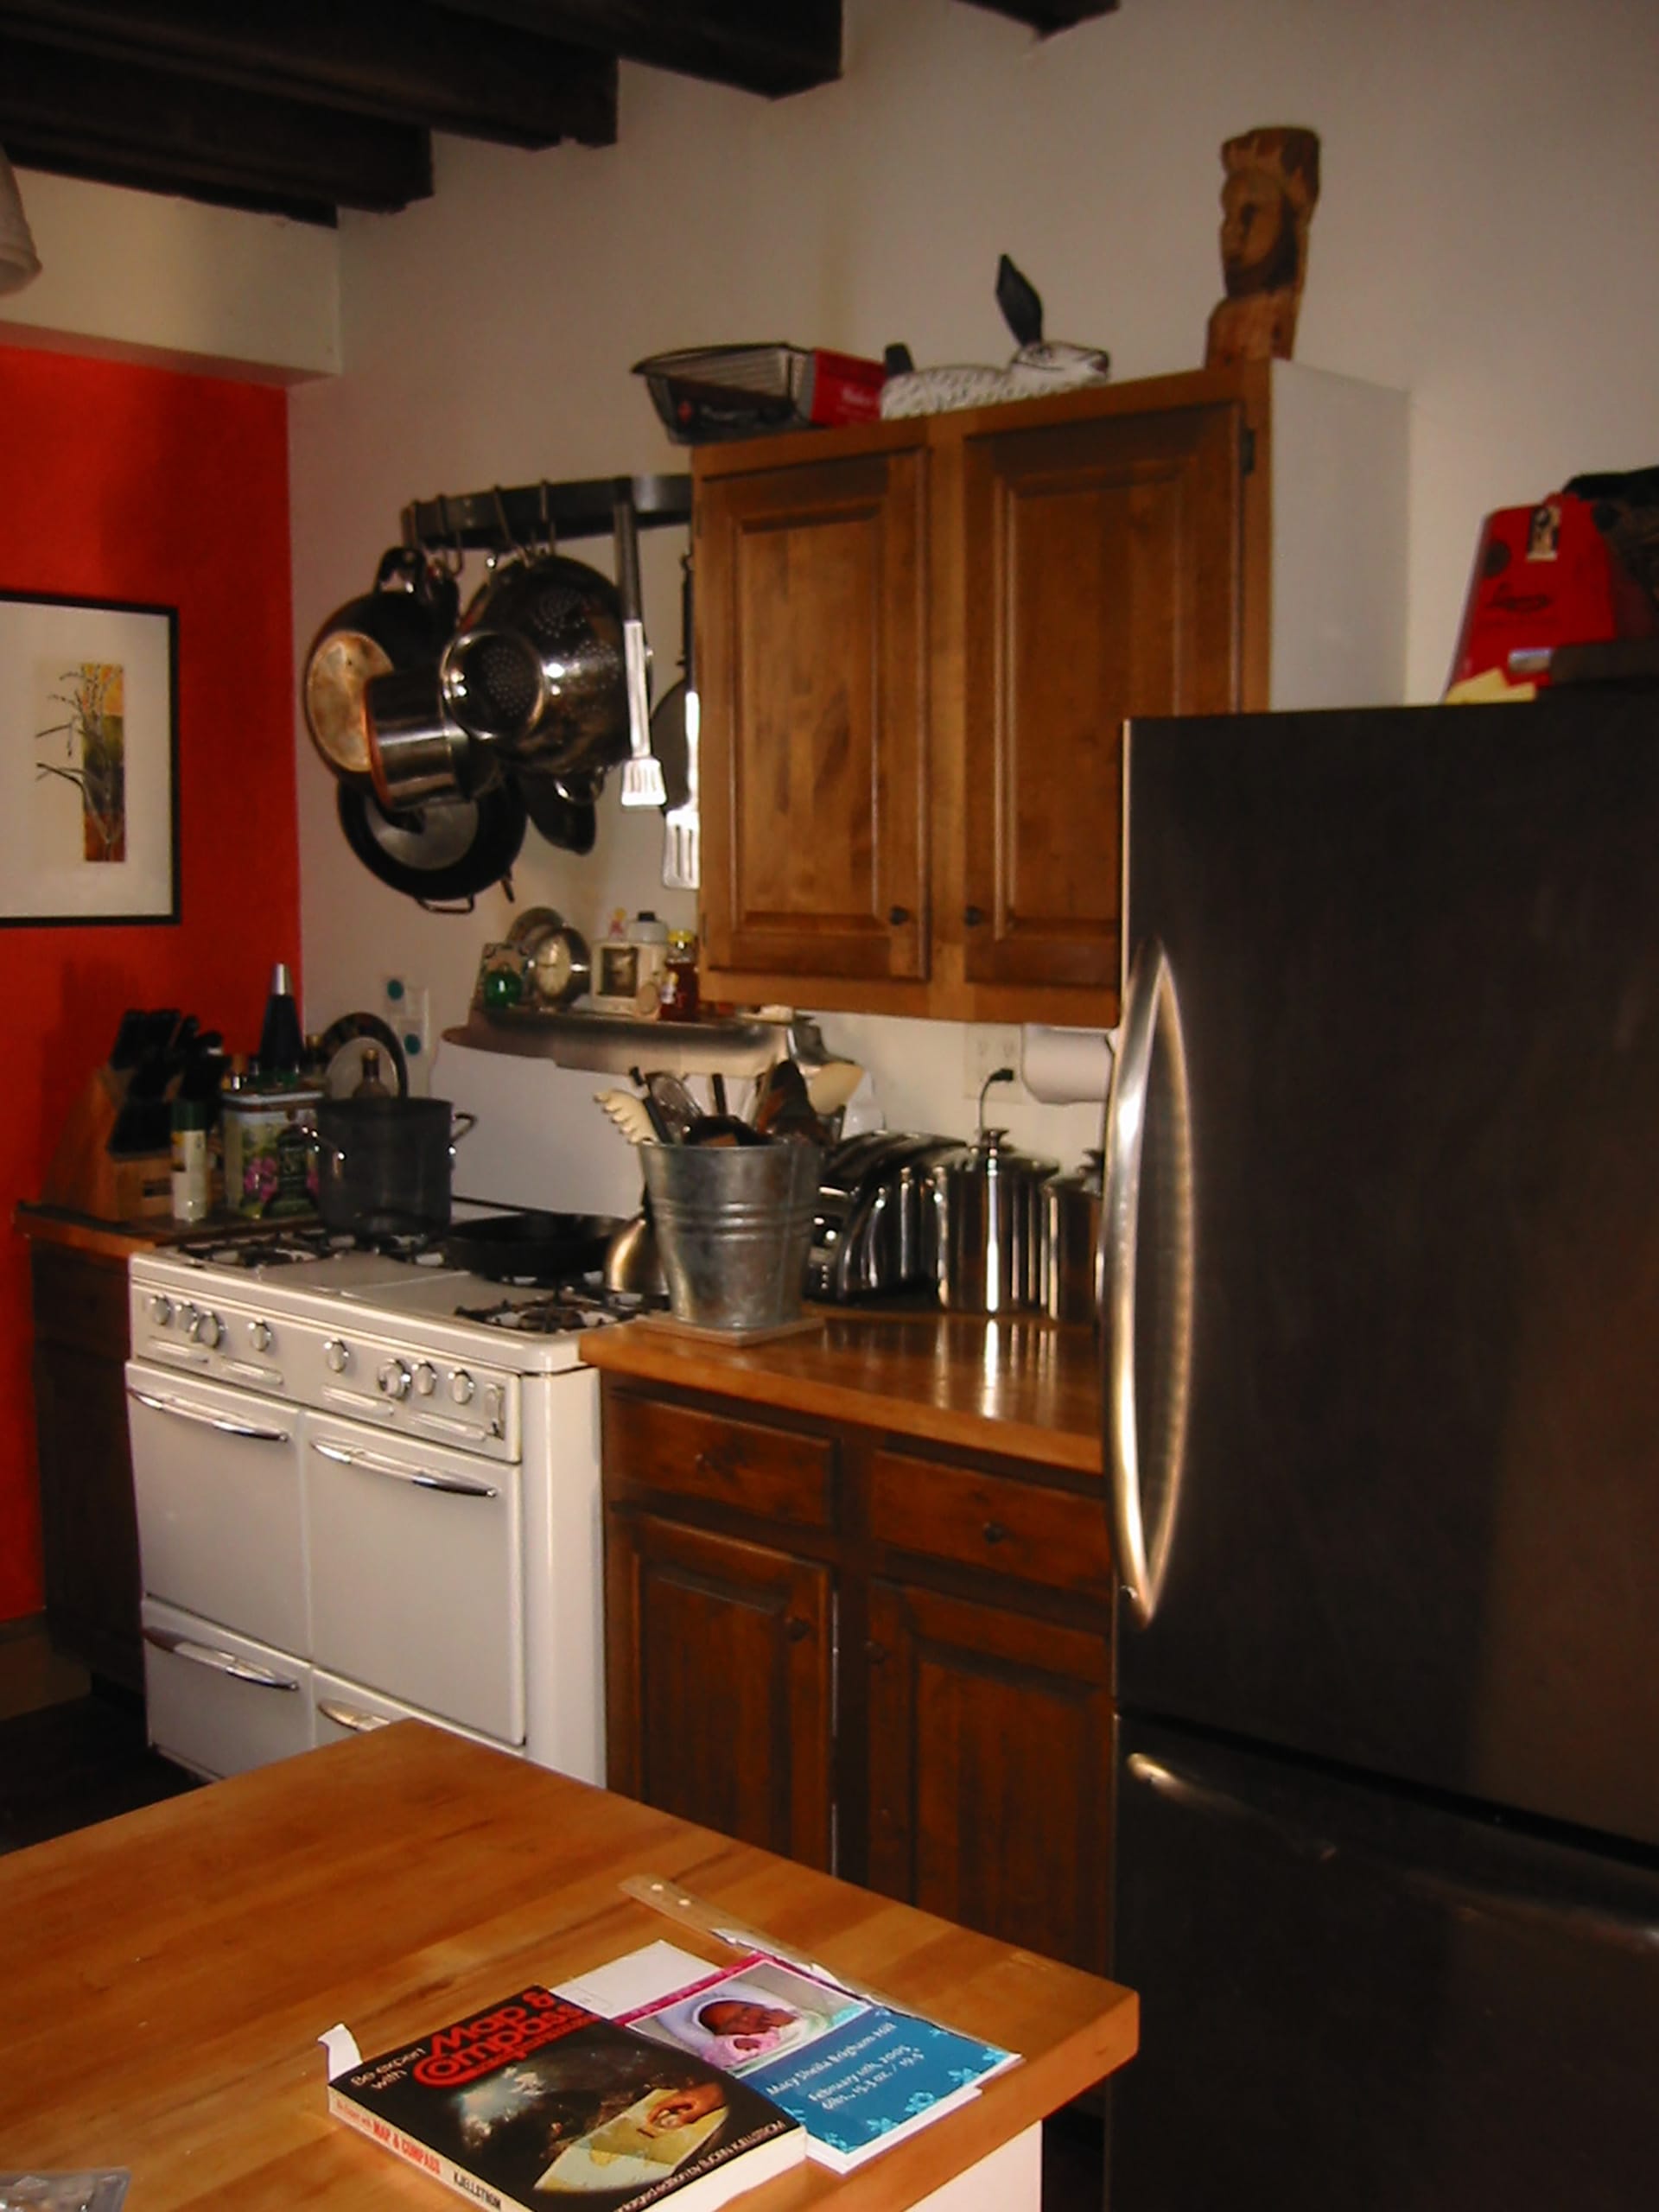 Kitchen of a carriage house before renovation with a red accent wall, white range, wood cabinets, and stainless steel refrigerator